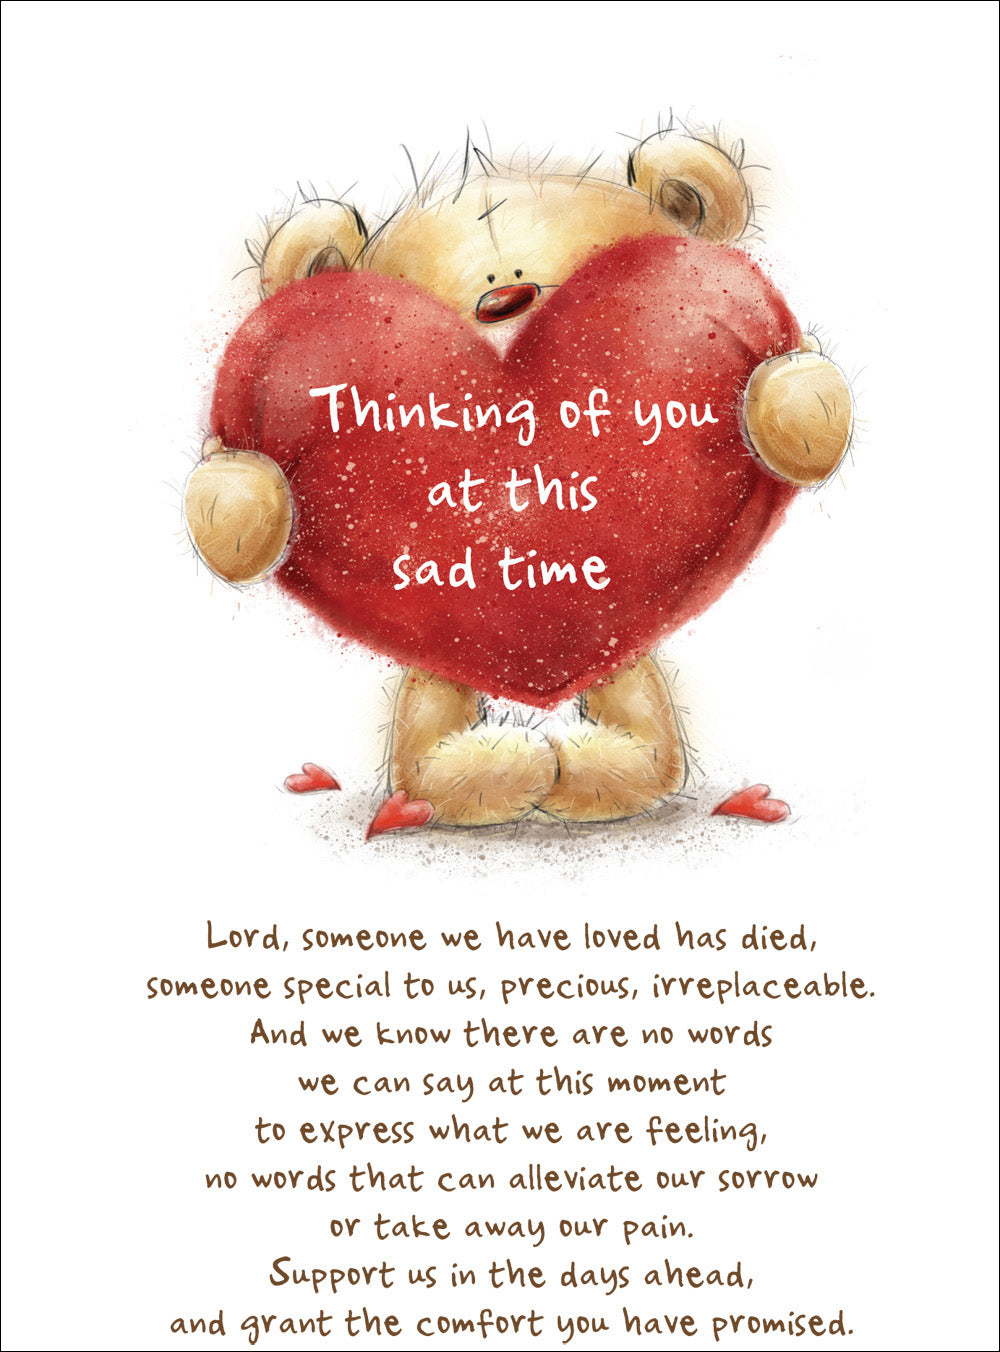 Thinking Of You At This Sad Time - Bear With Heart-  Standard CardThinking Of You At This Sad Time - Bear With Heart-  Standard Card